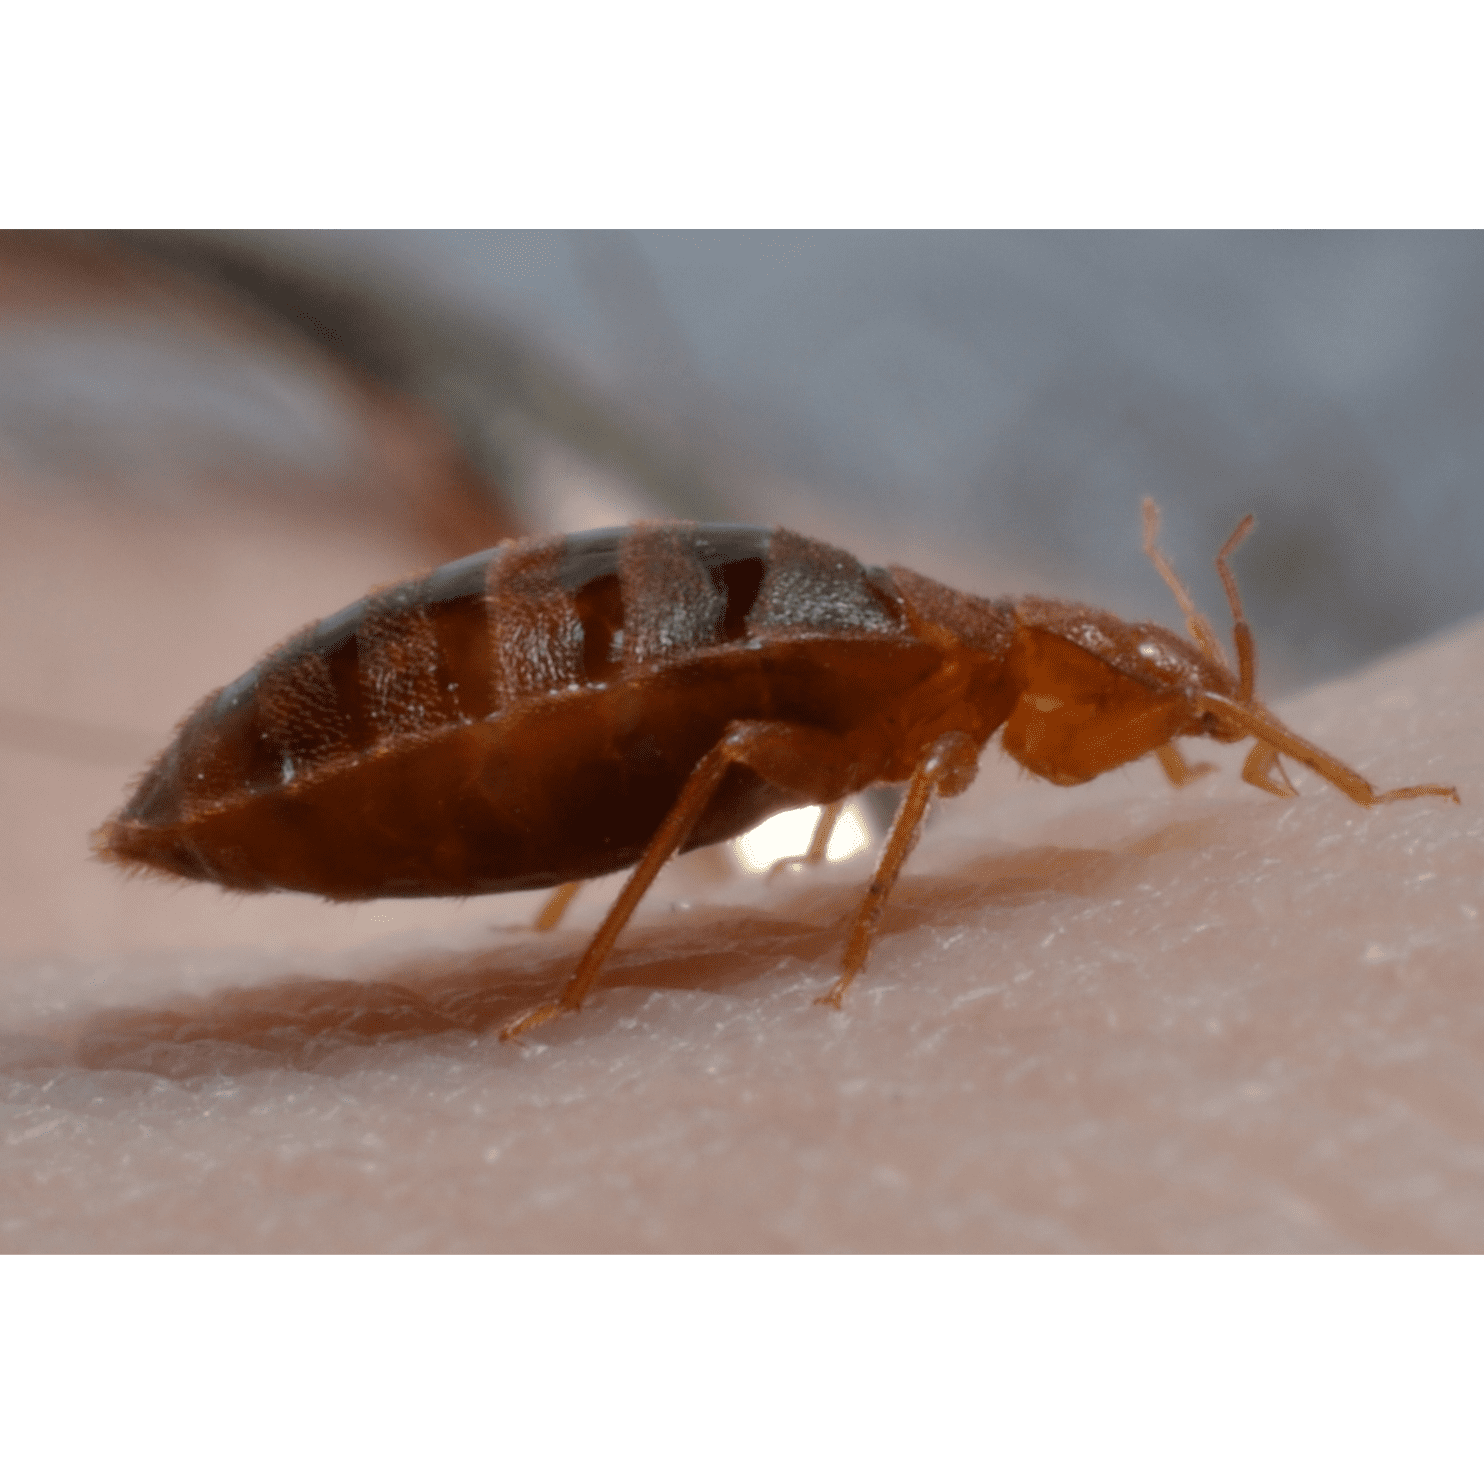 An Engorged Bed Bug